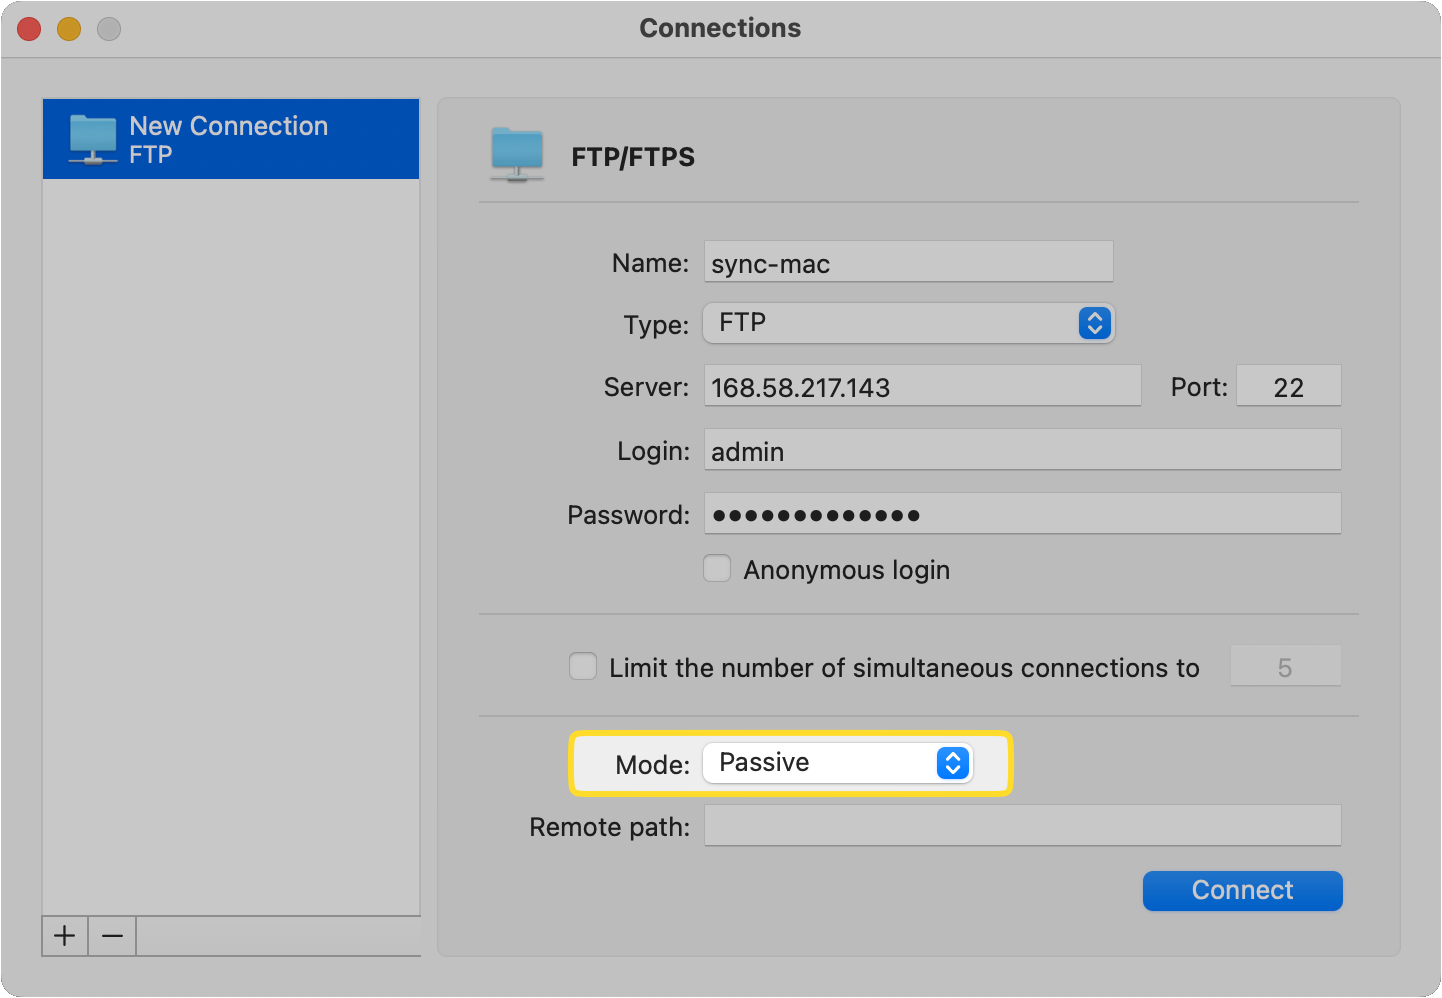 The Mode field of the new FTP connection is outlined